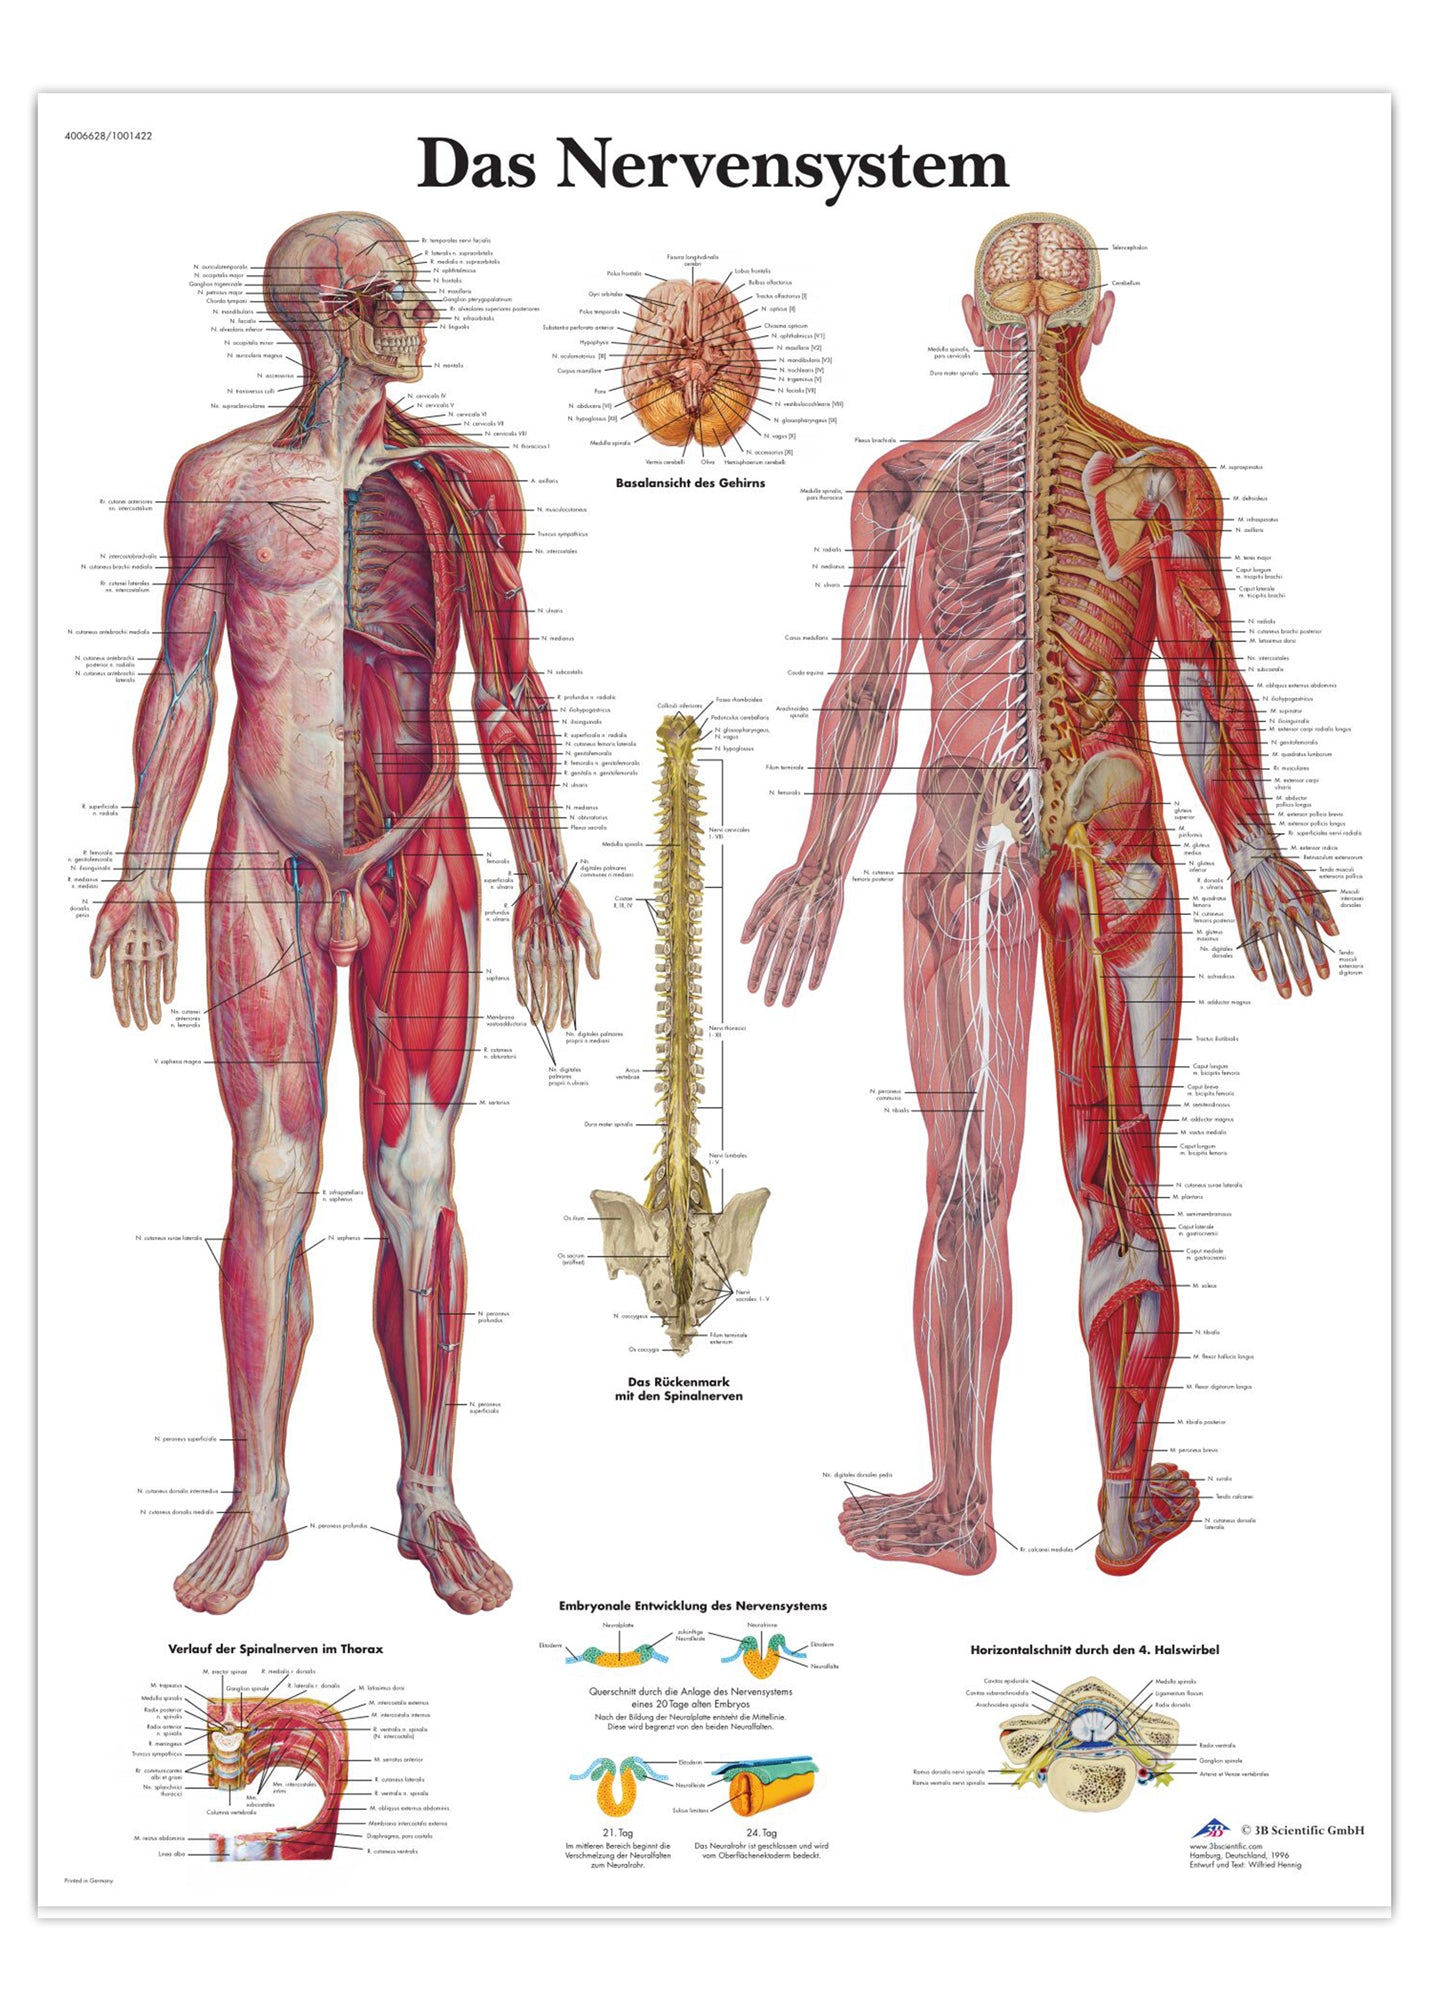 Laminated poster about the nervous system in Latin (but German title)